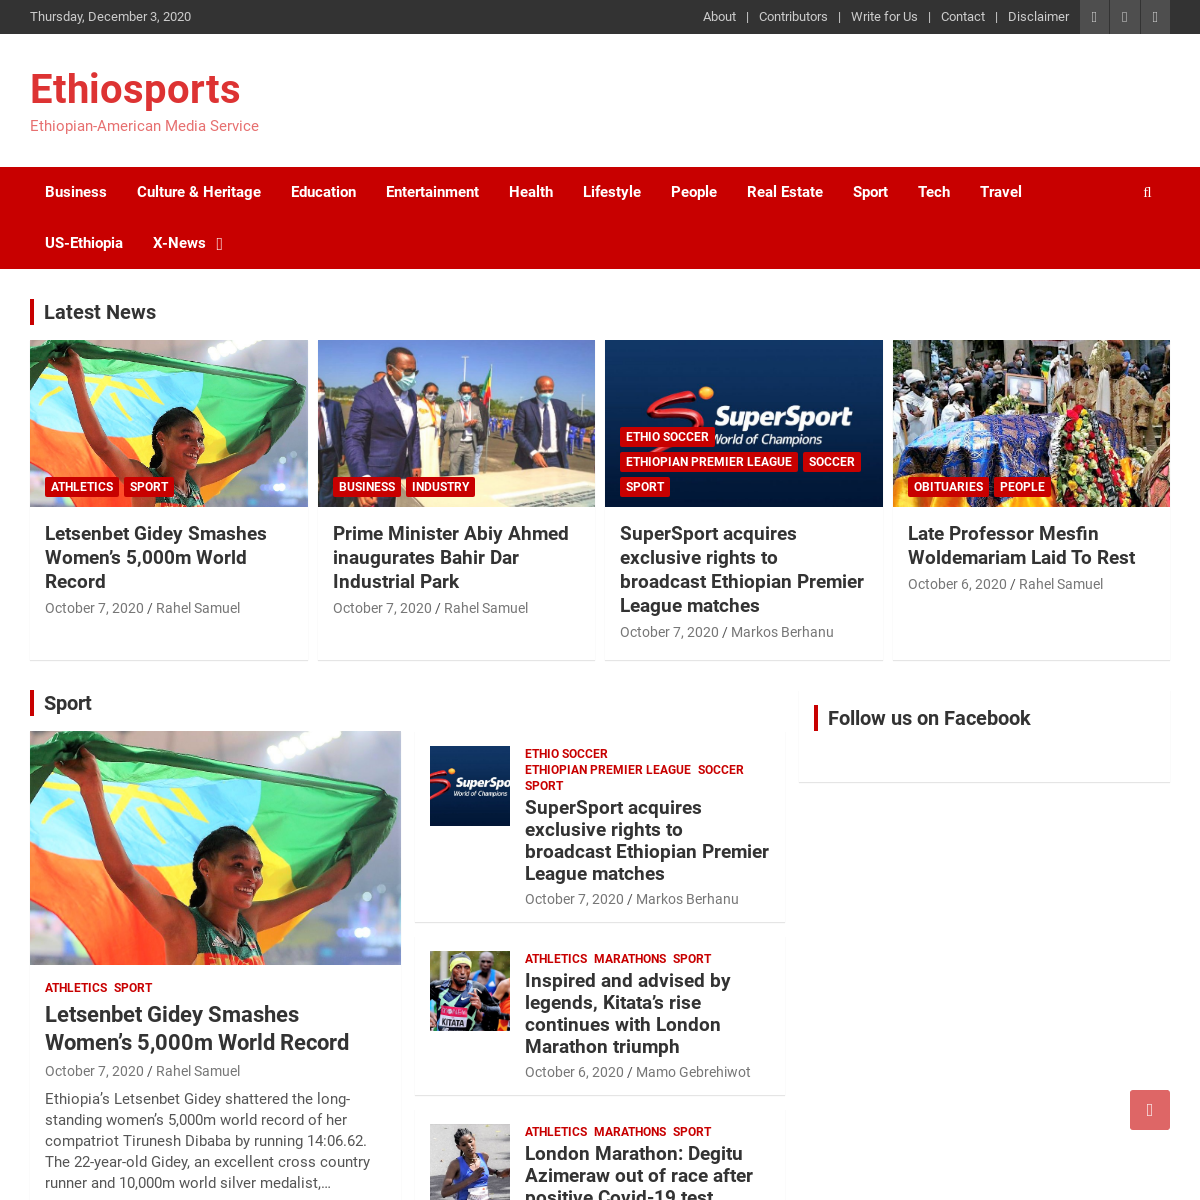 A complete backup of ethiosports.com